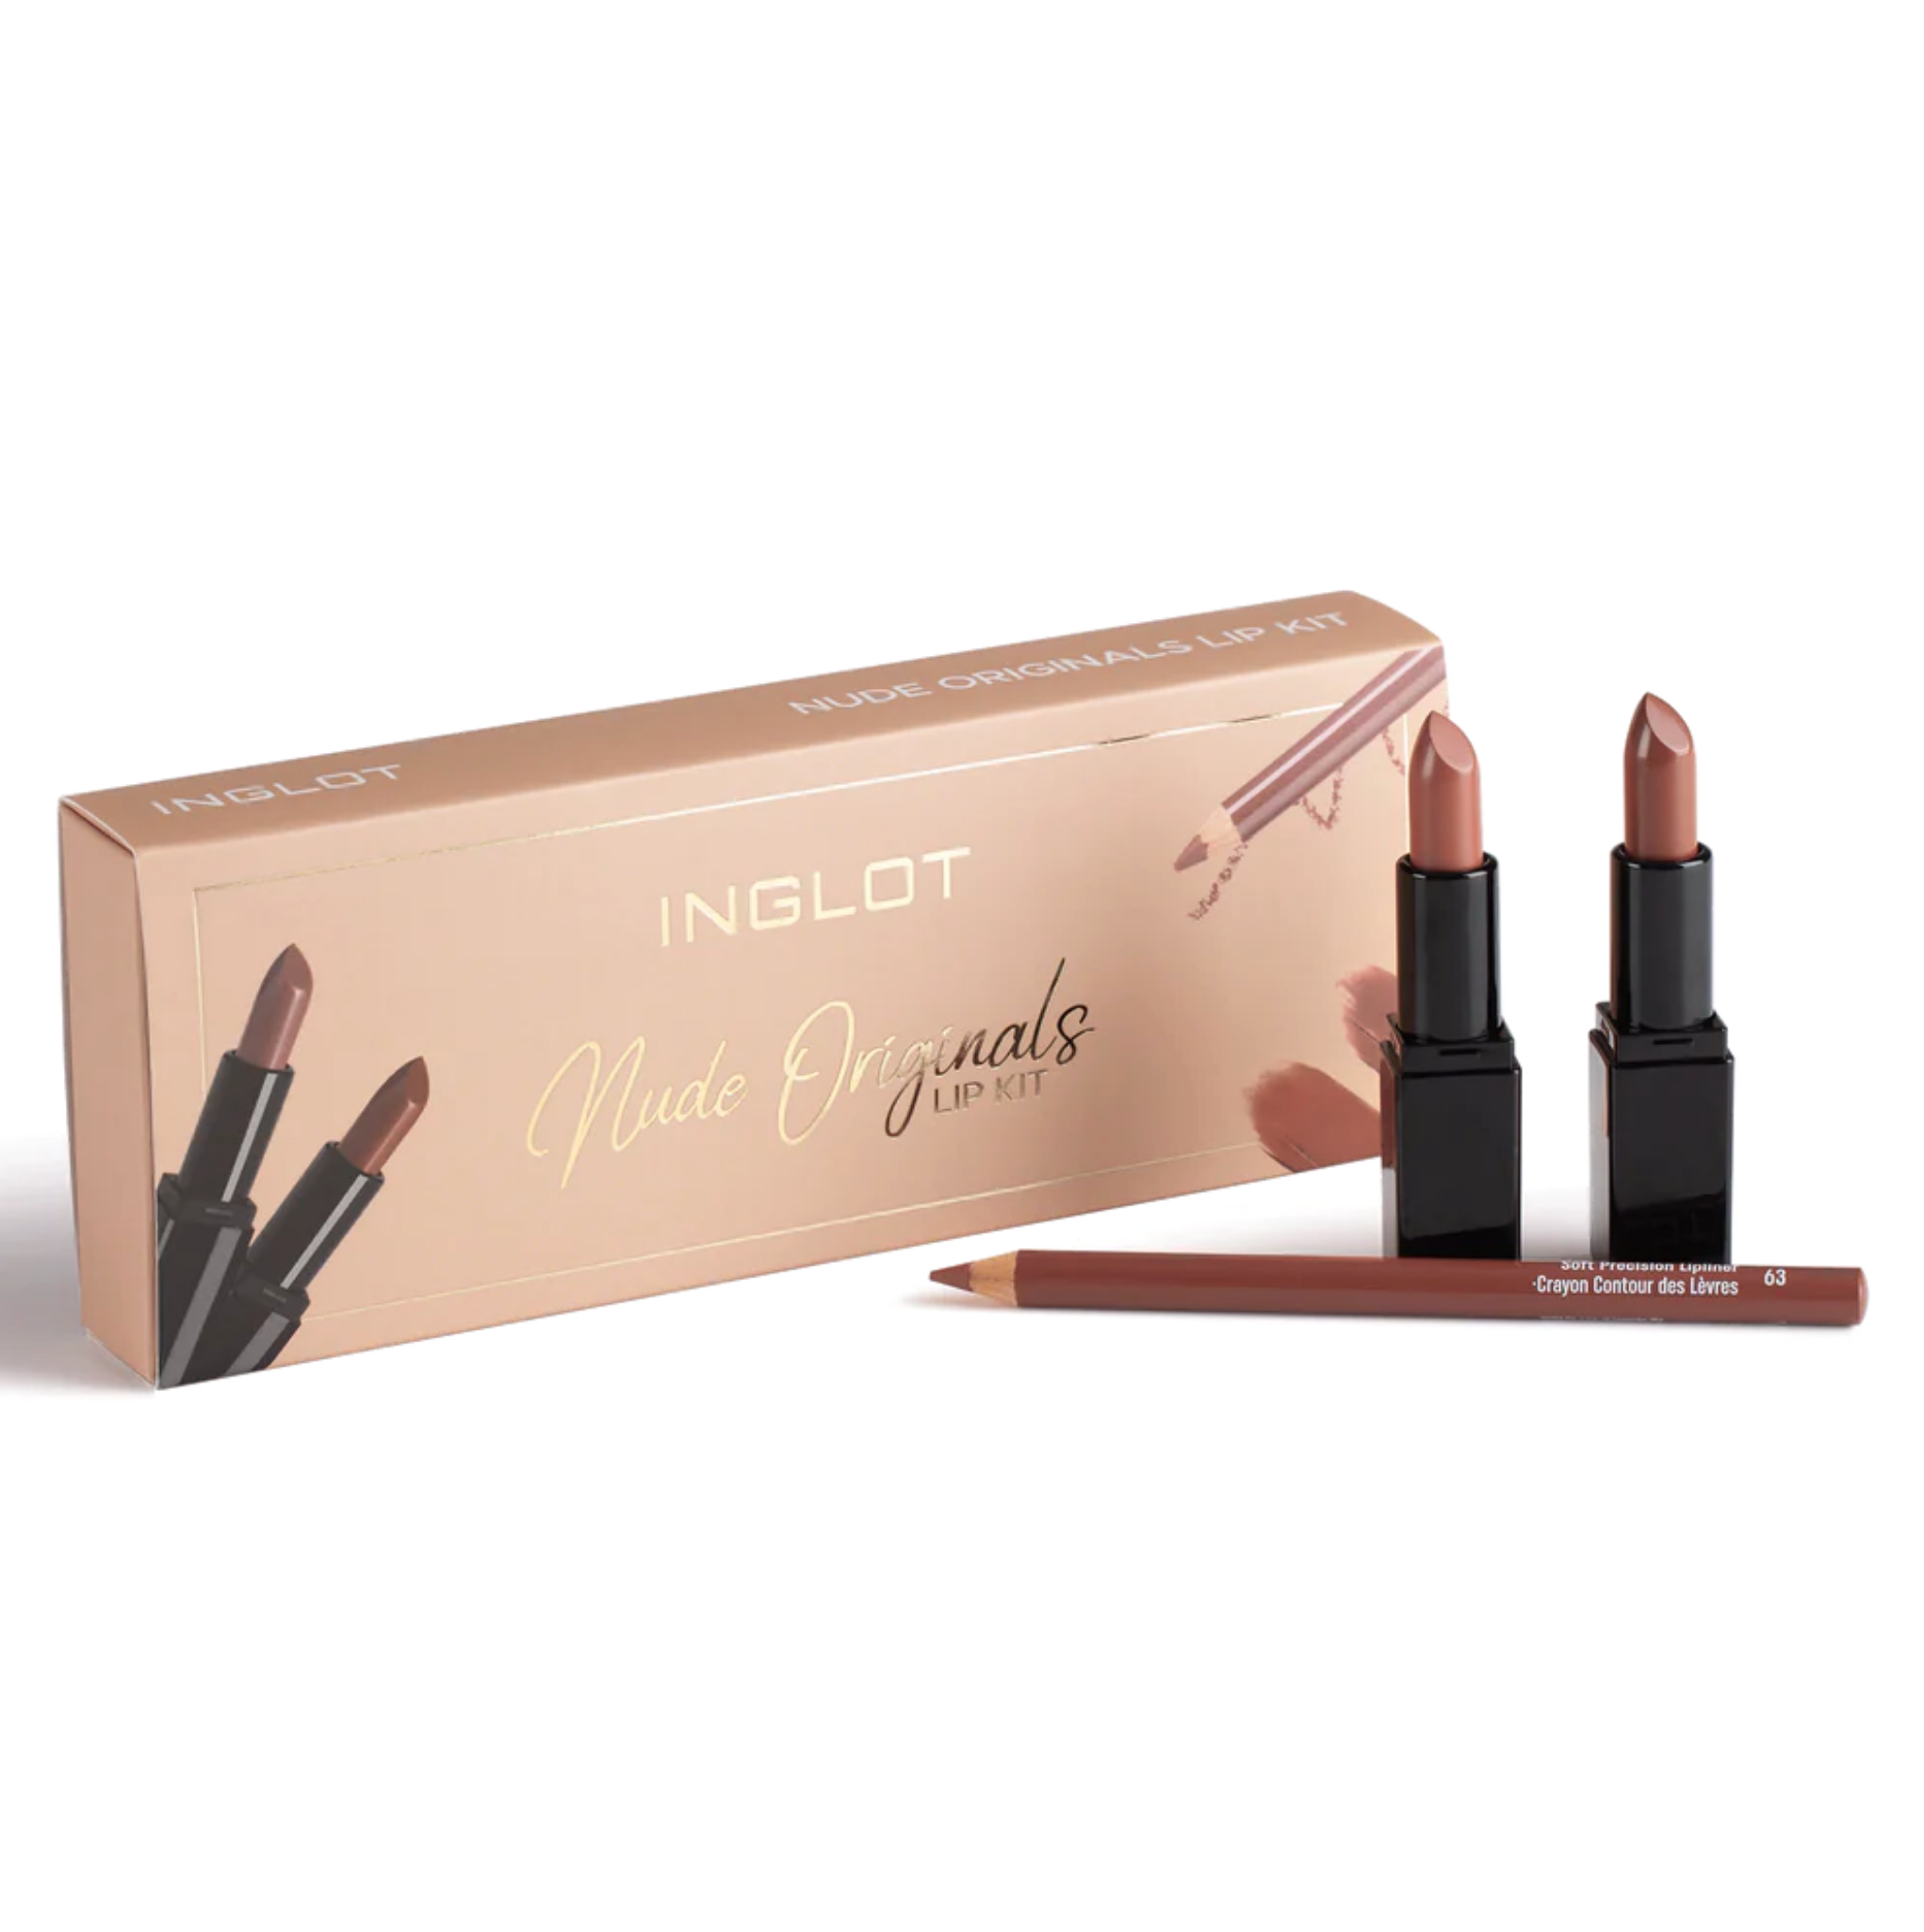 Inglot Originals Lip Kit, open with products showing